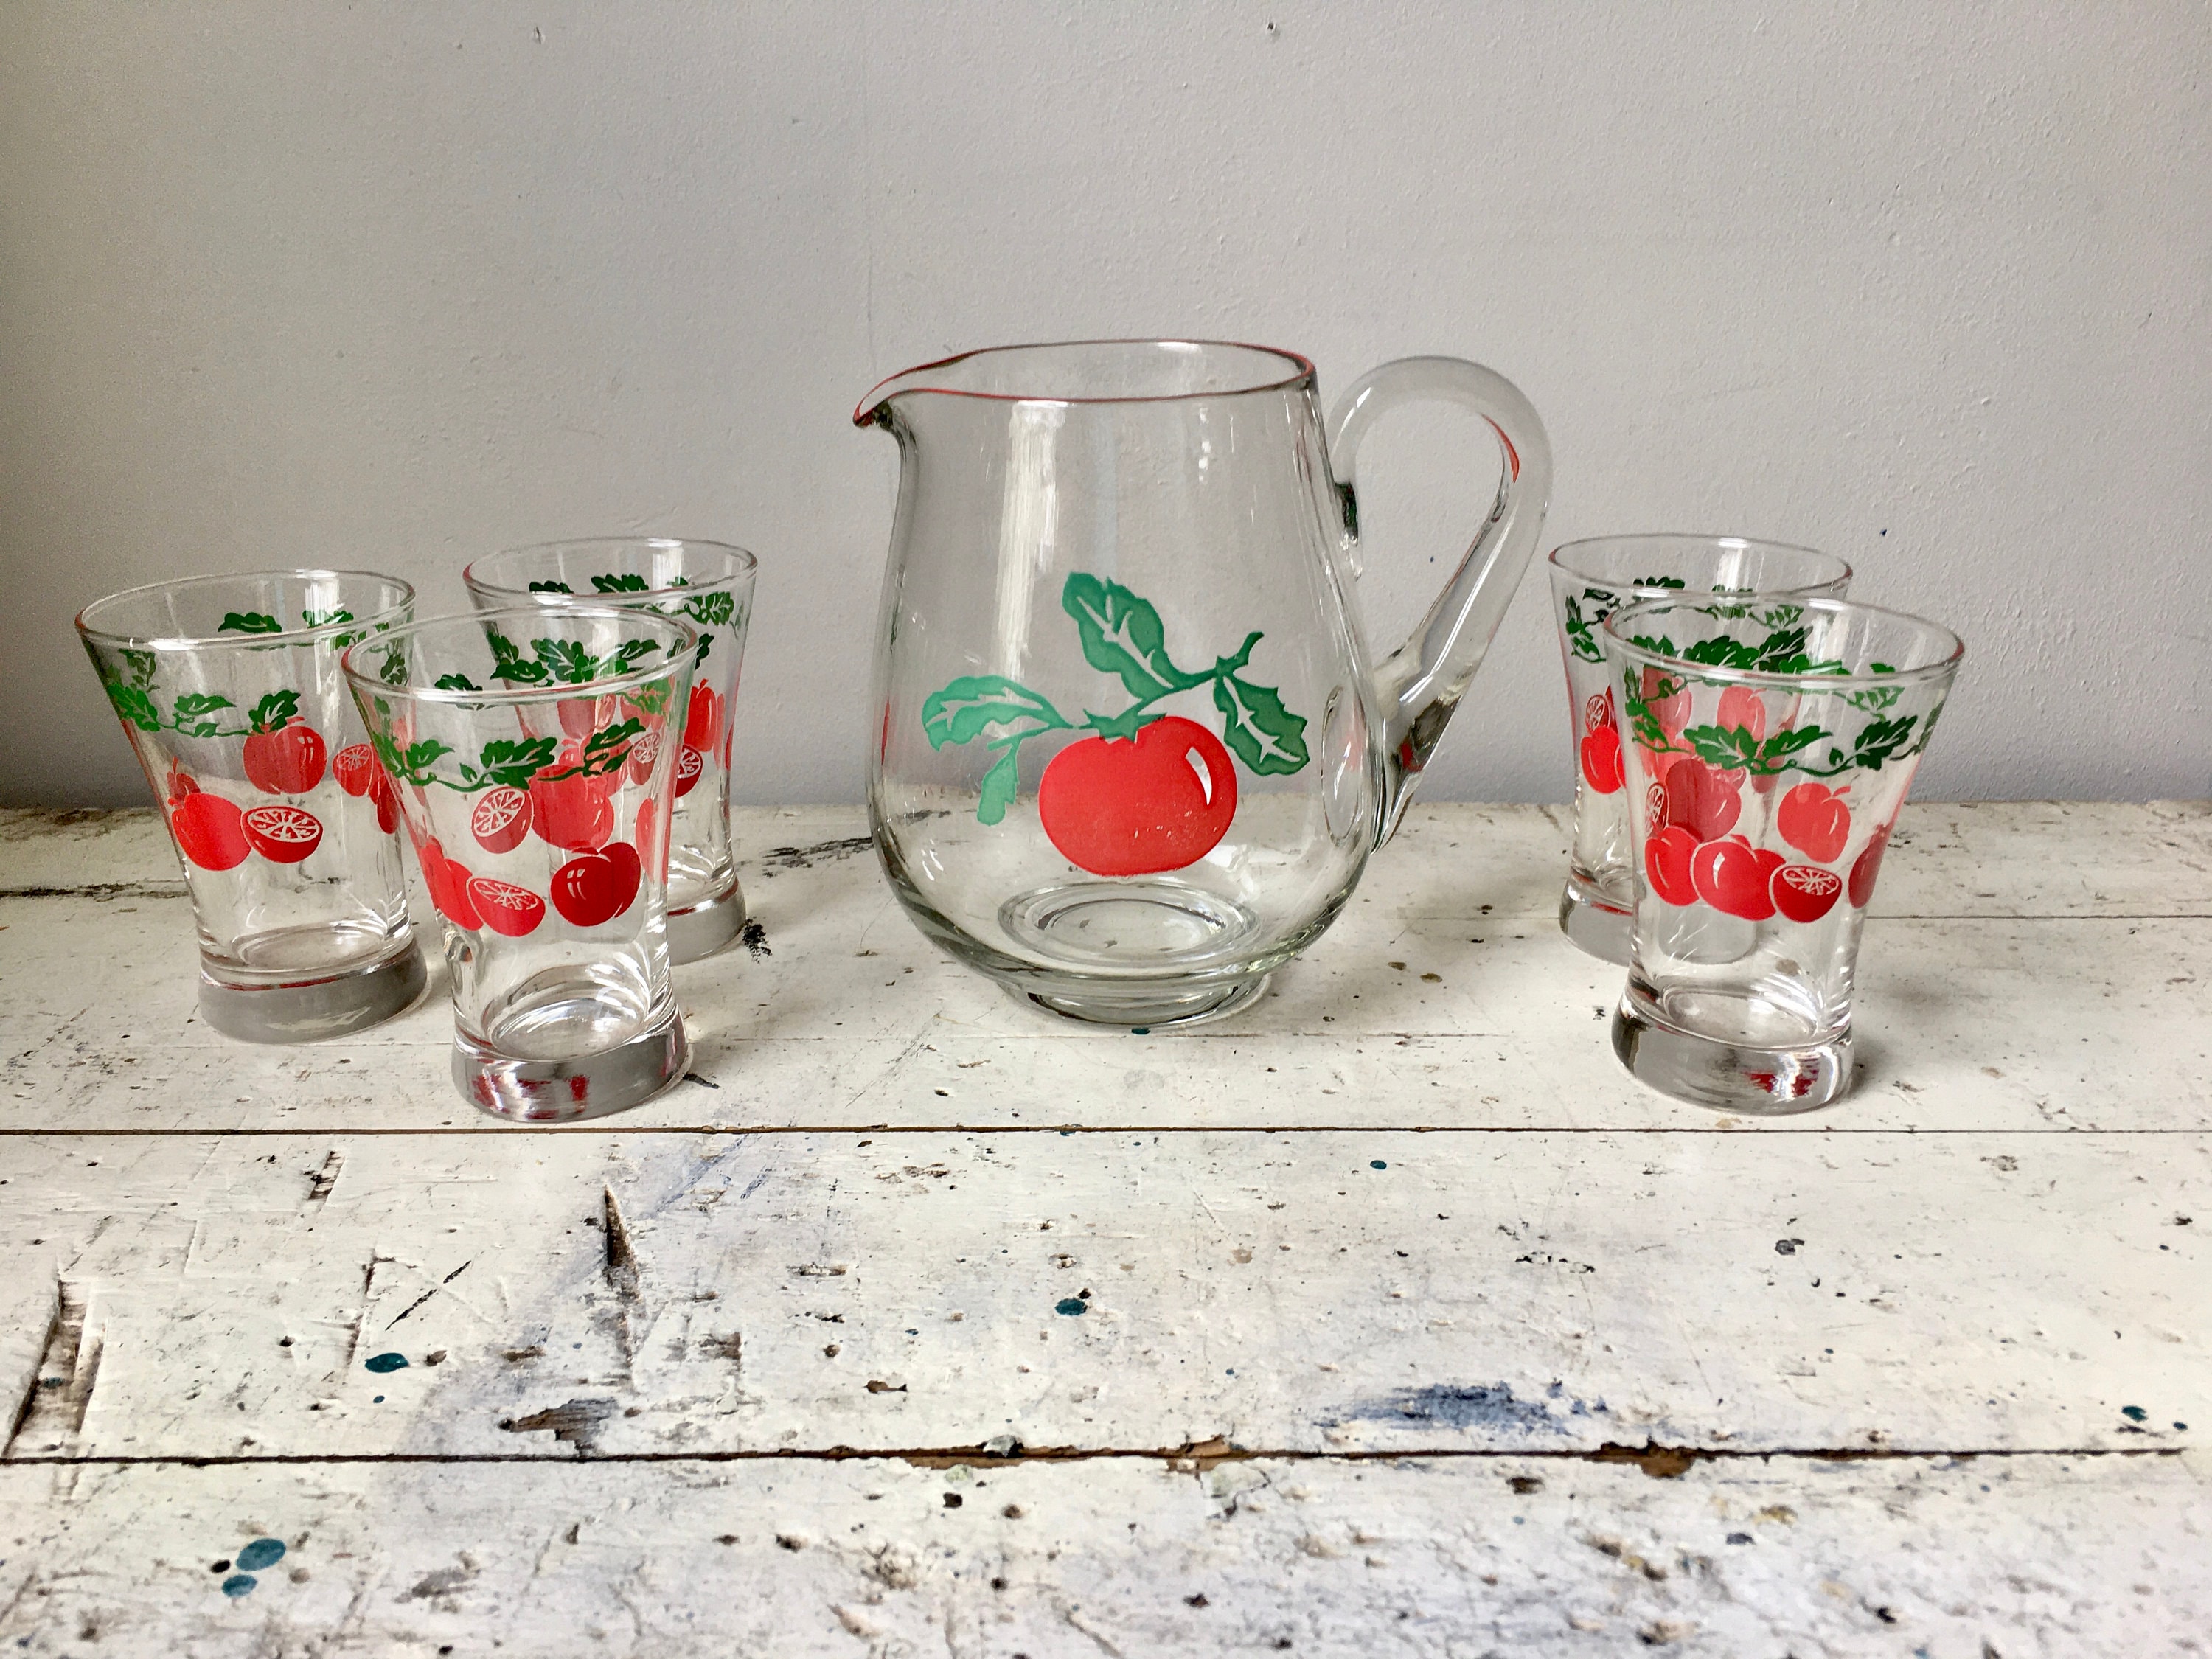 Vintage Tomato Juice Pitcher With Glass 